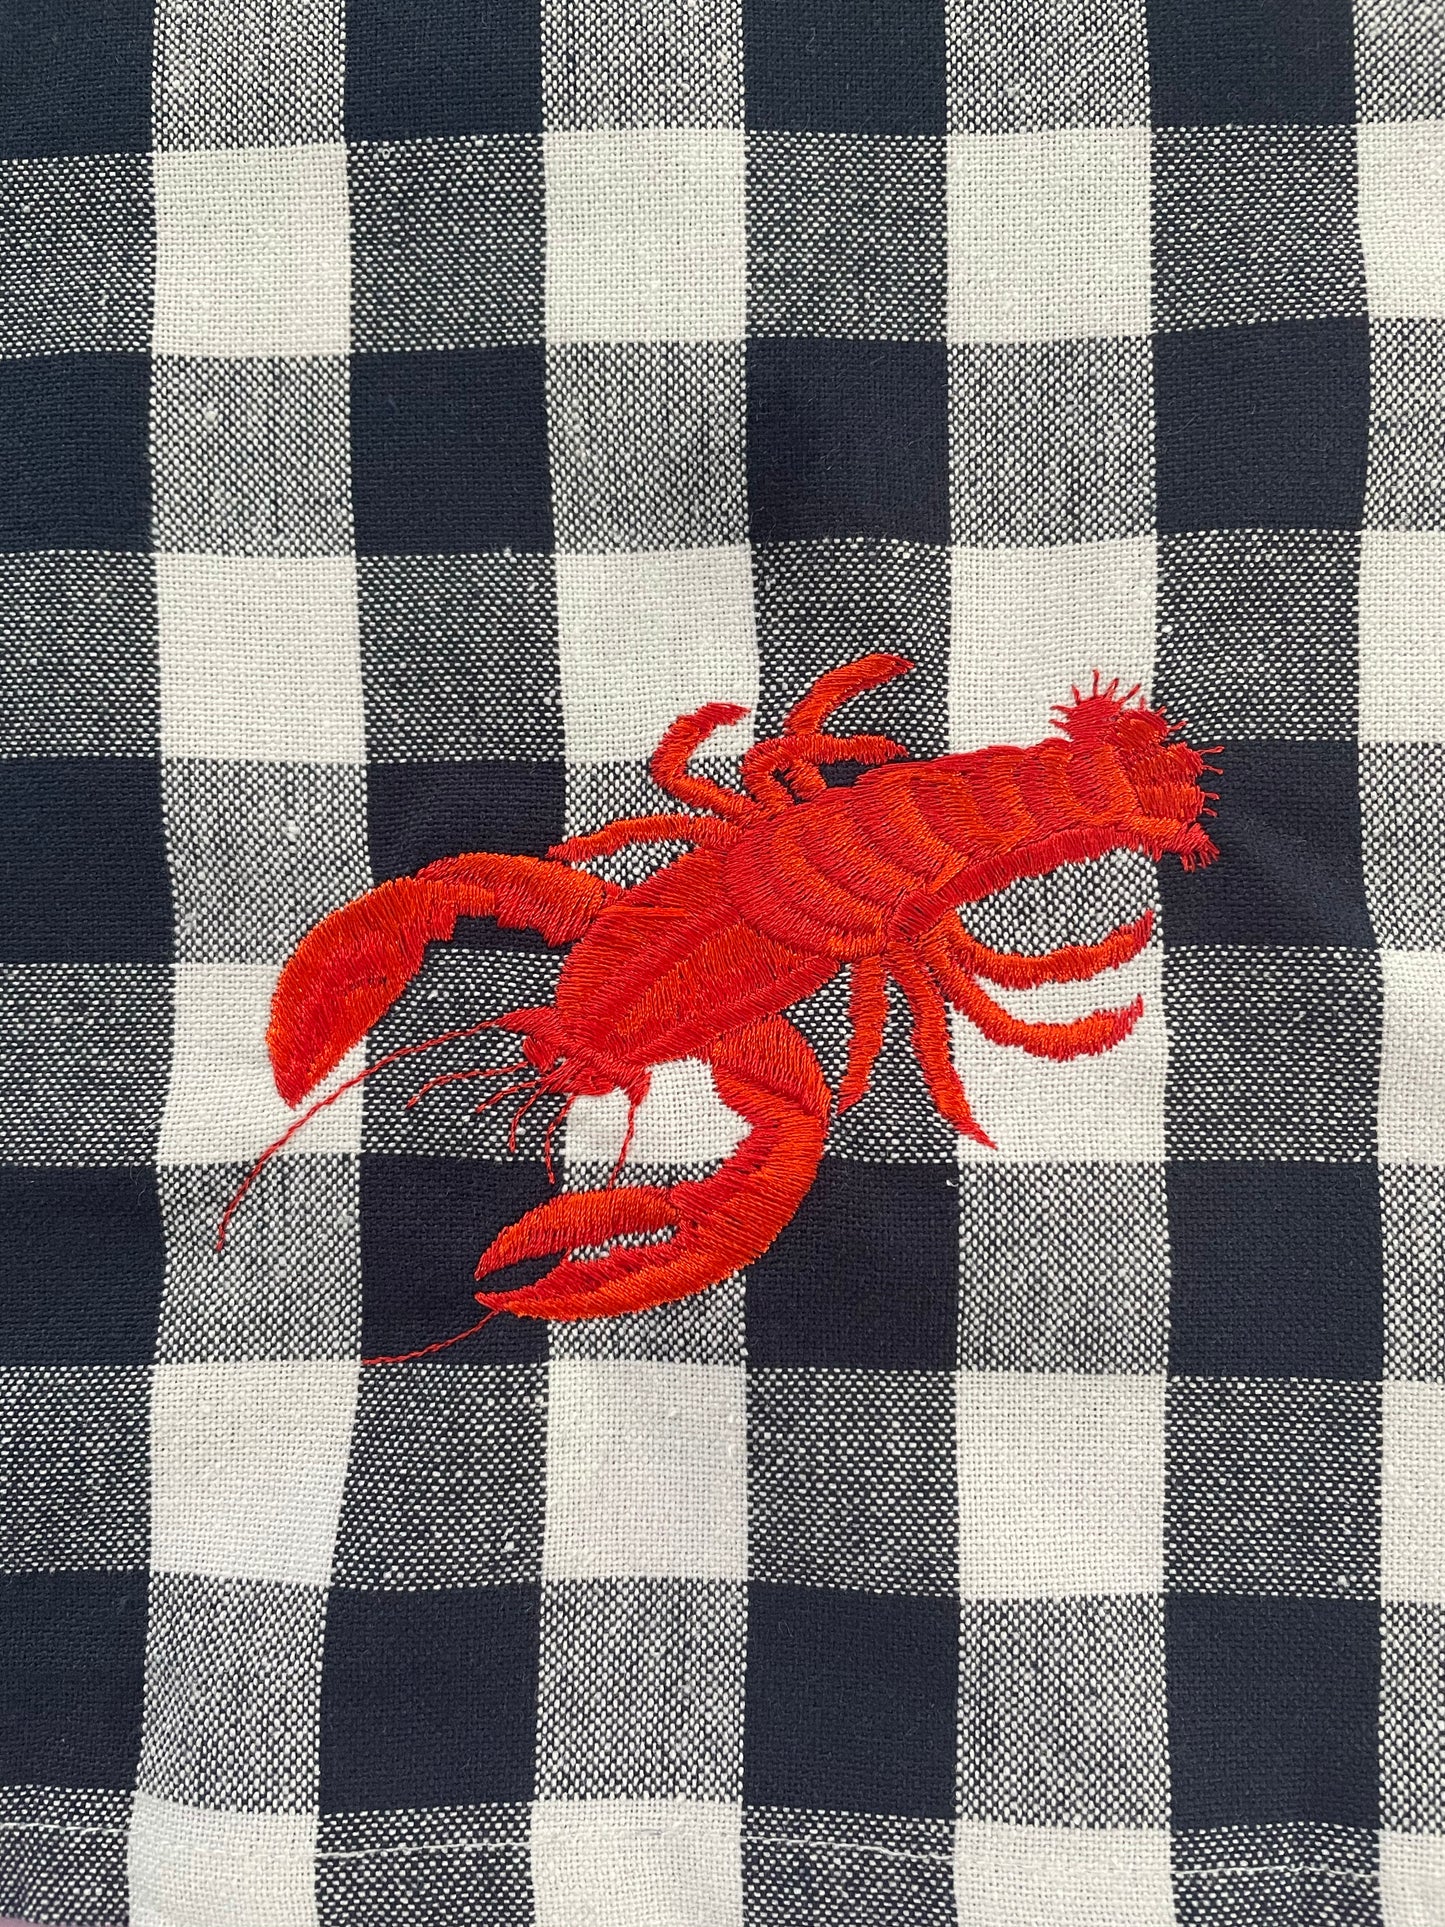 Lobster Embroidered Kitchen Towel. Cotton Dish Towels